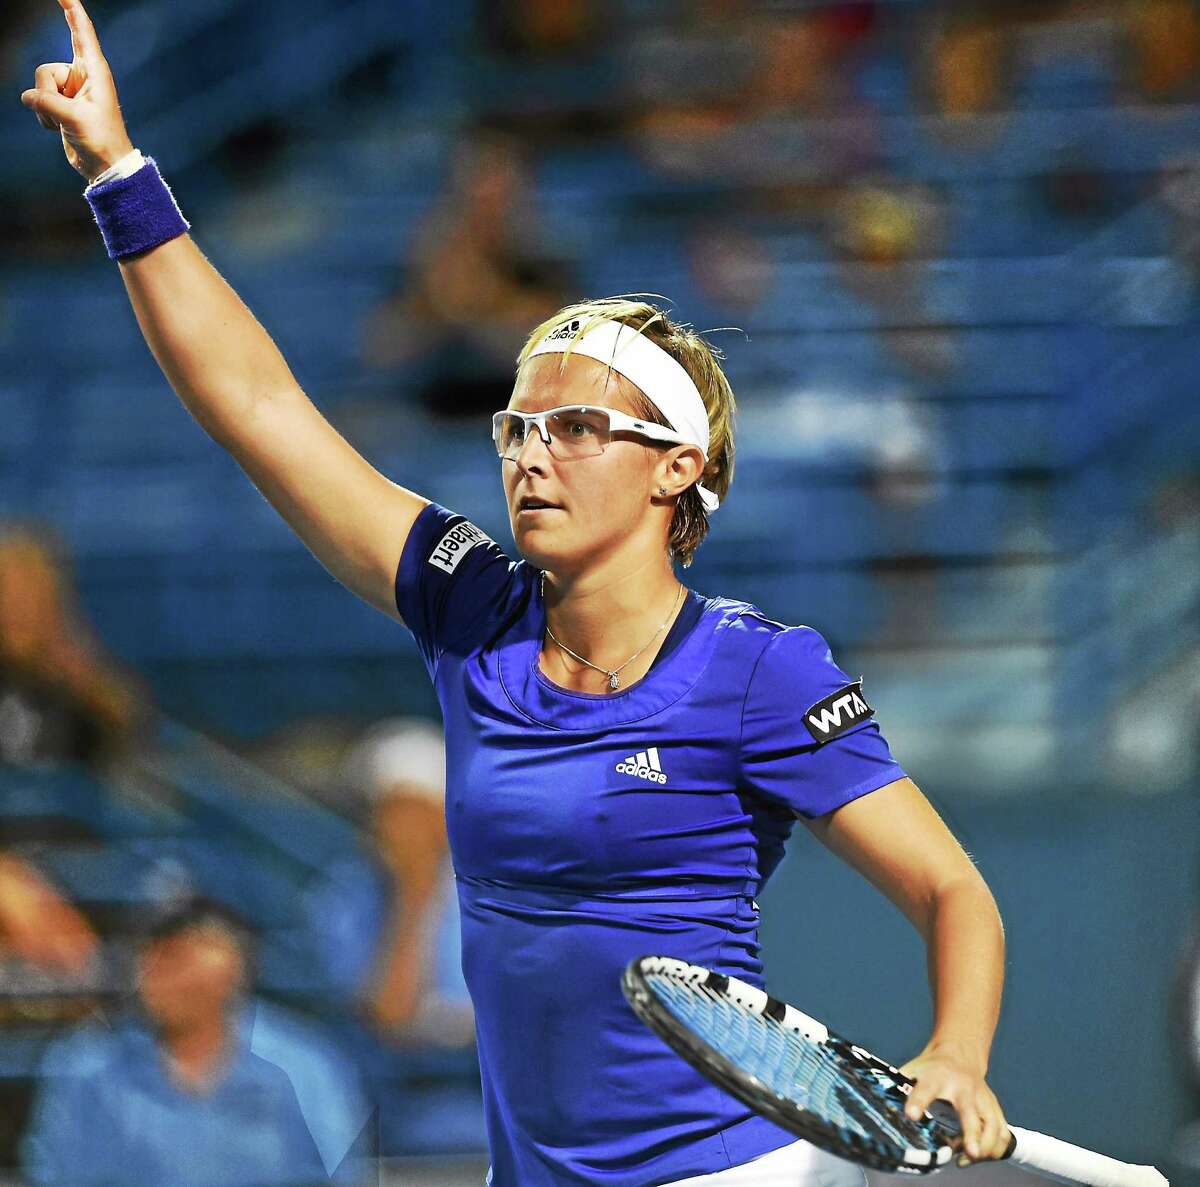 Kirstin Flipkens reacts to winning her maraton match against Andrea Petkovic at the Connecticut Open on Wednesday.